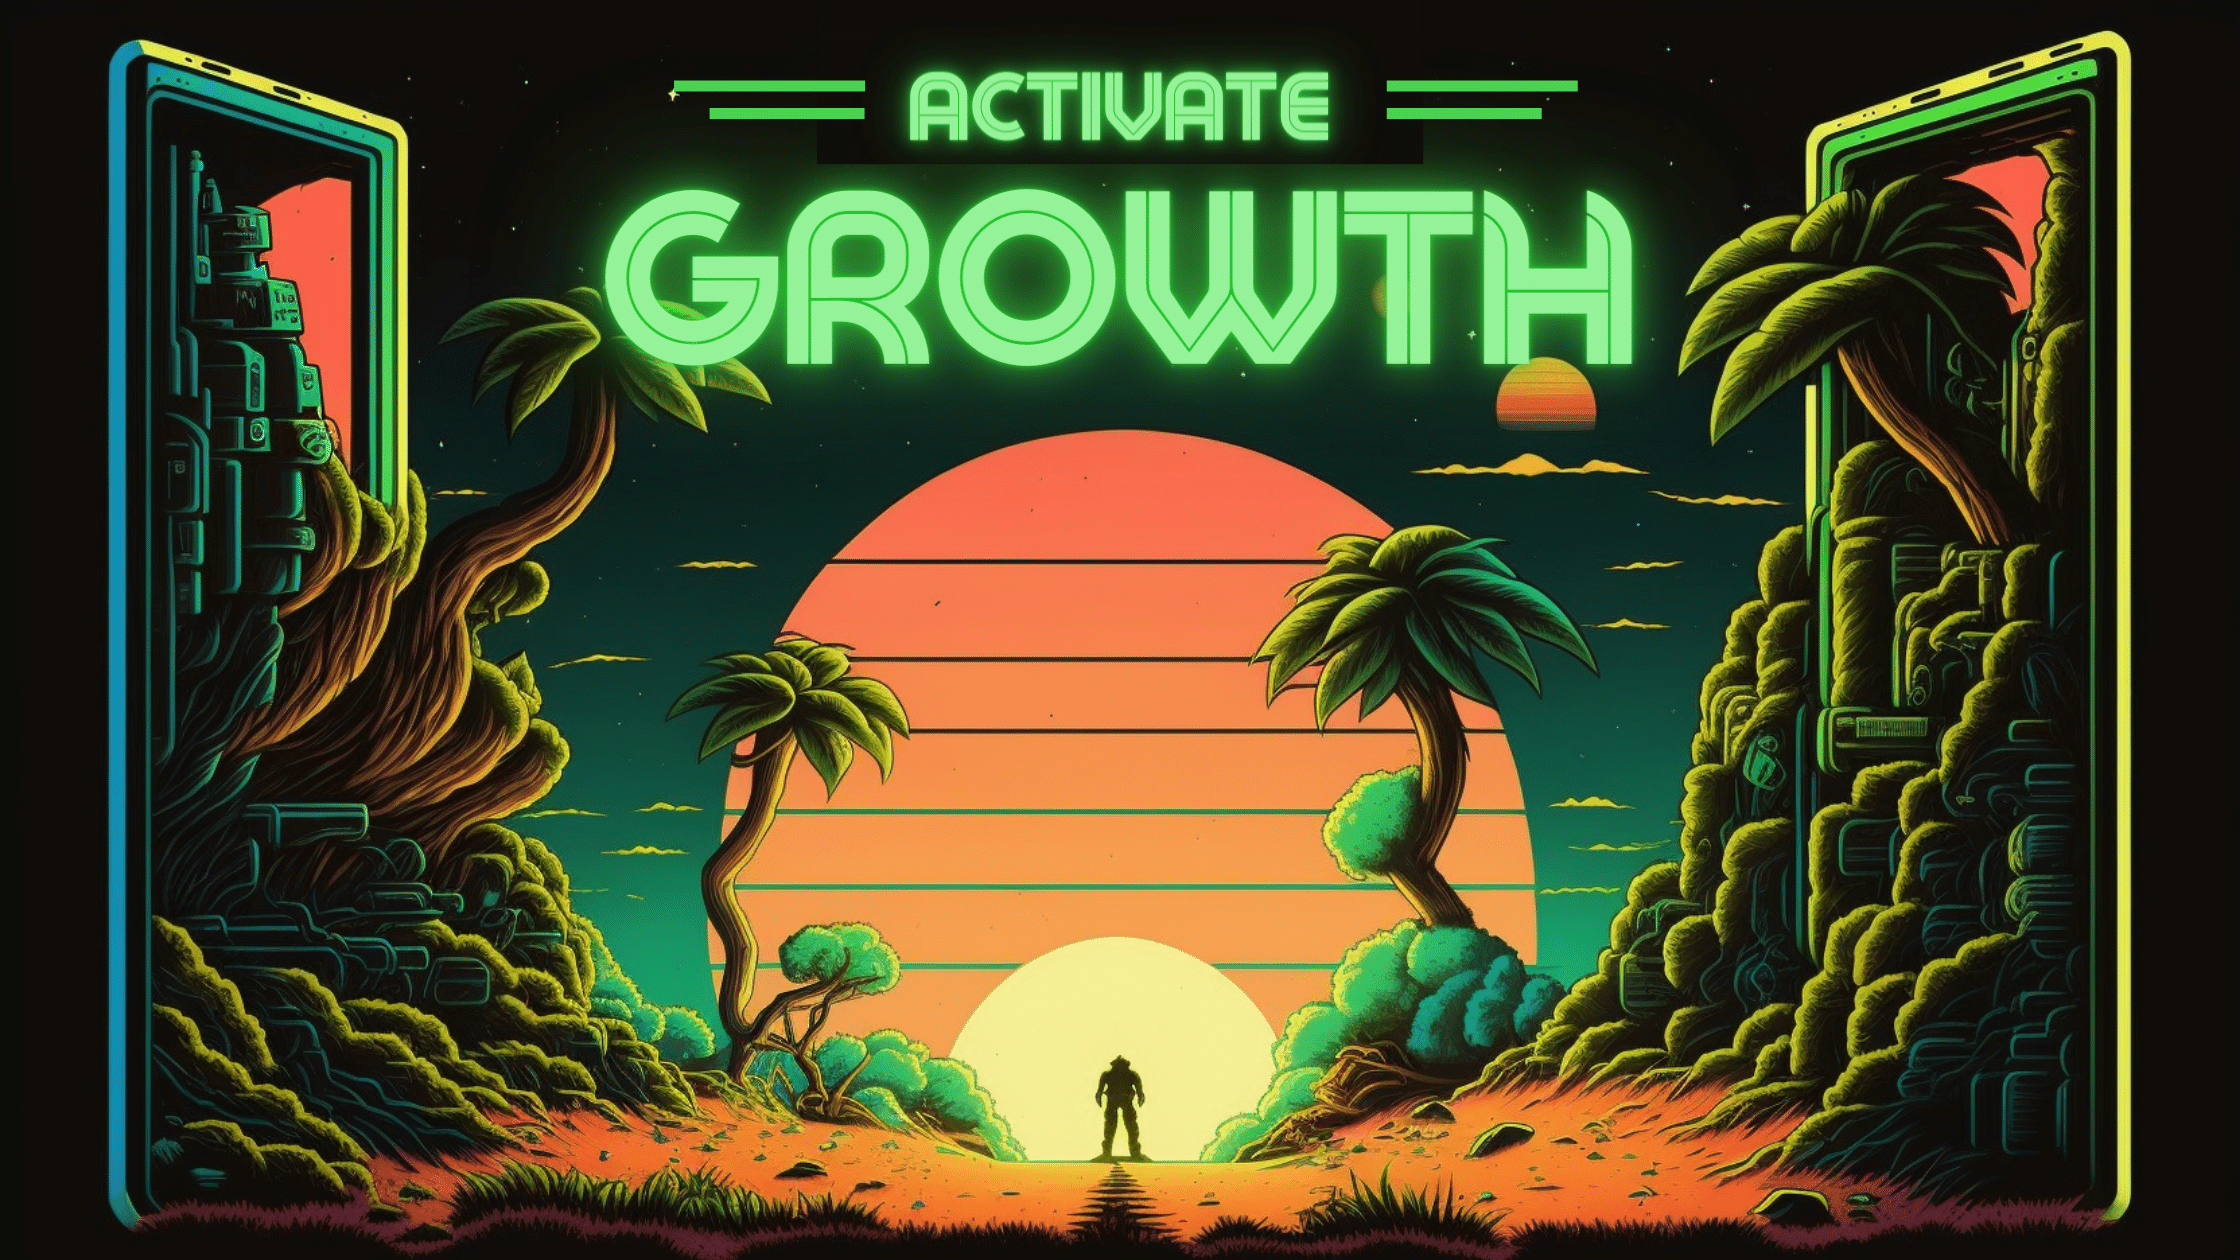 Activate "Growth Mode"